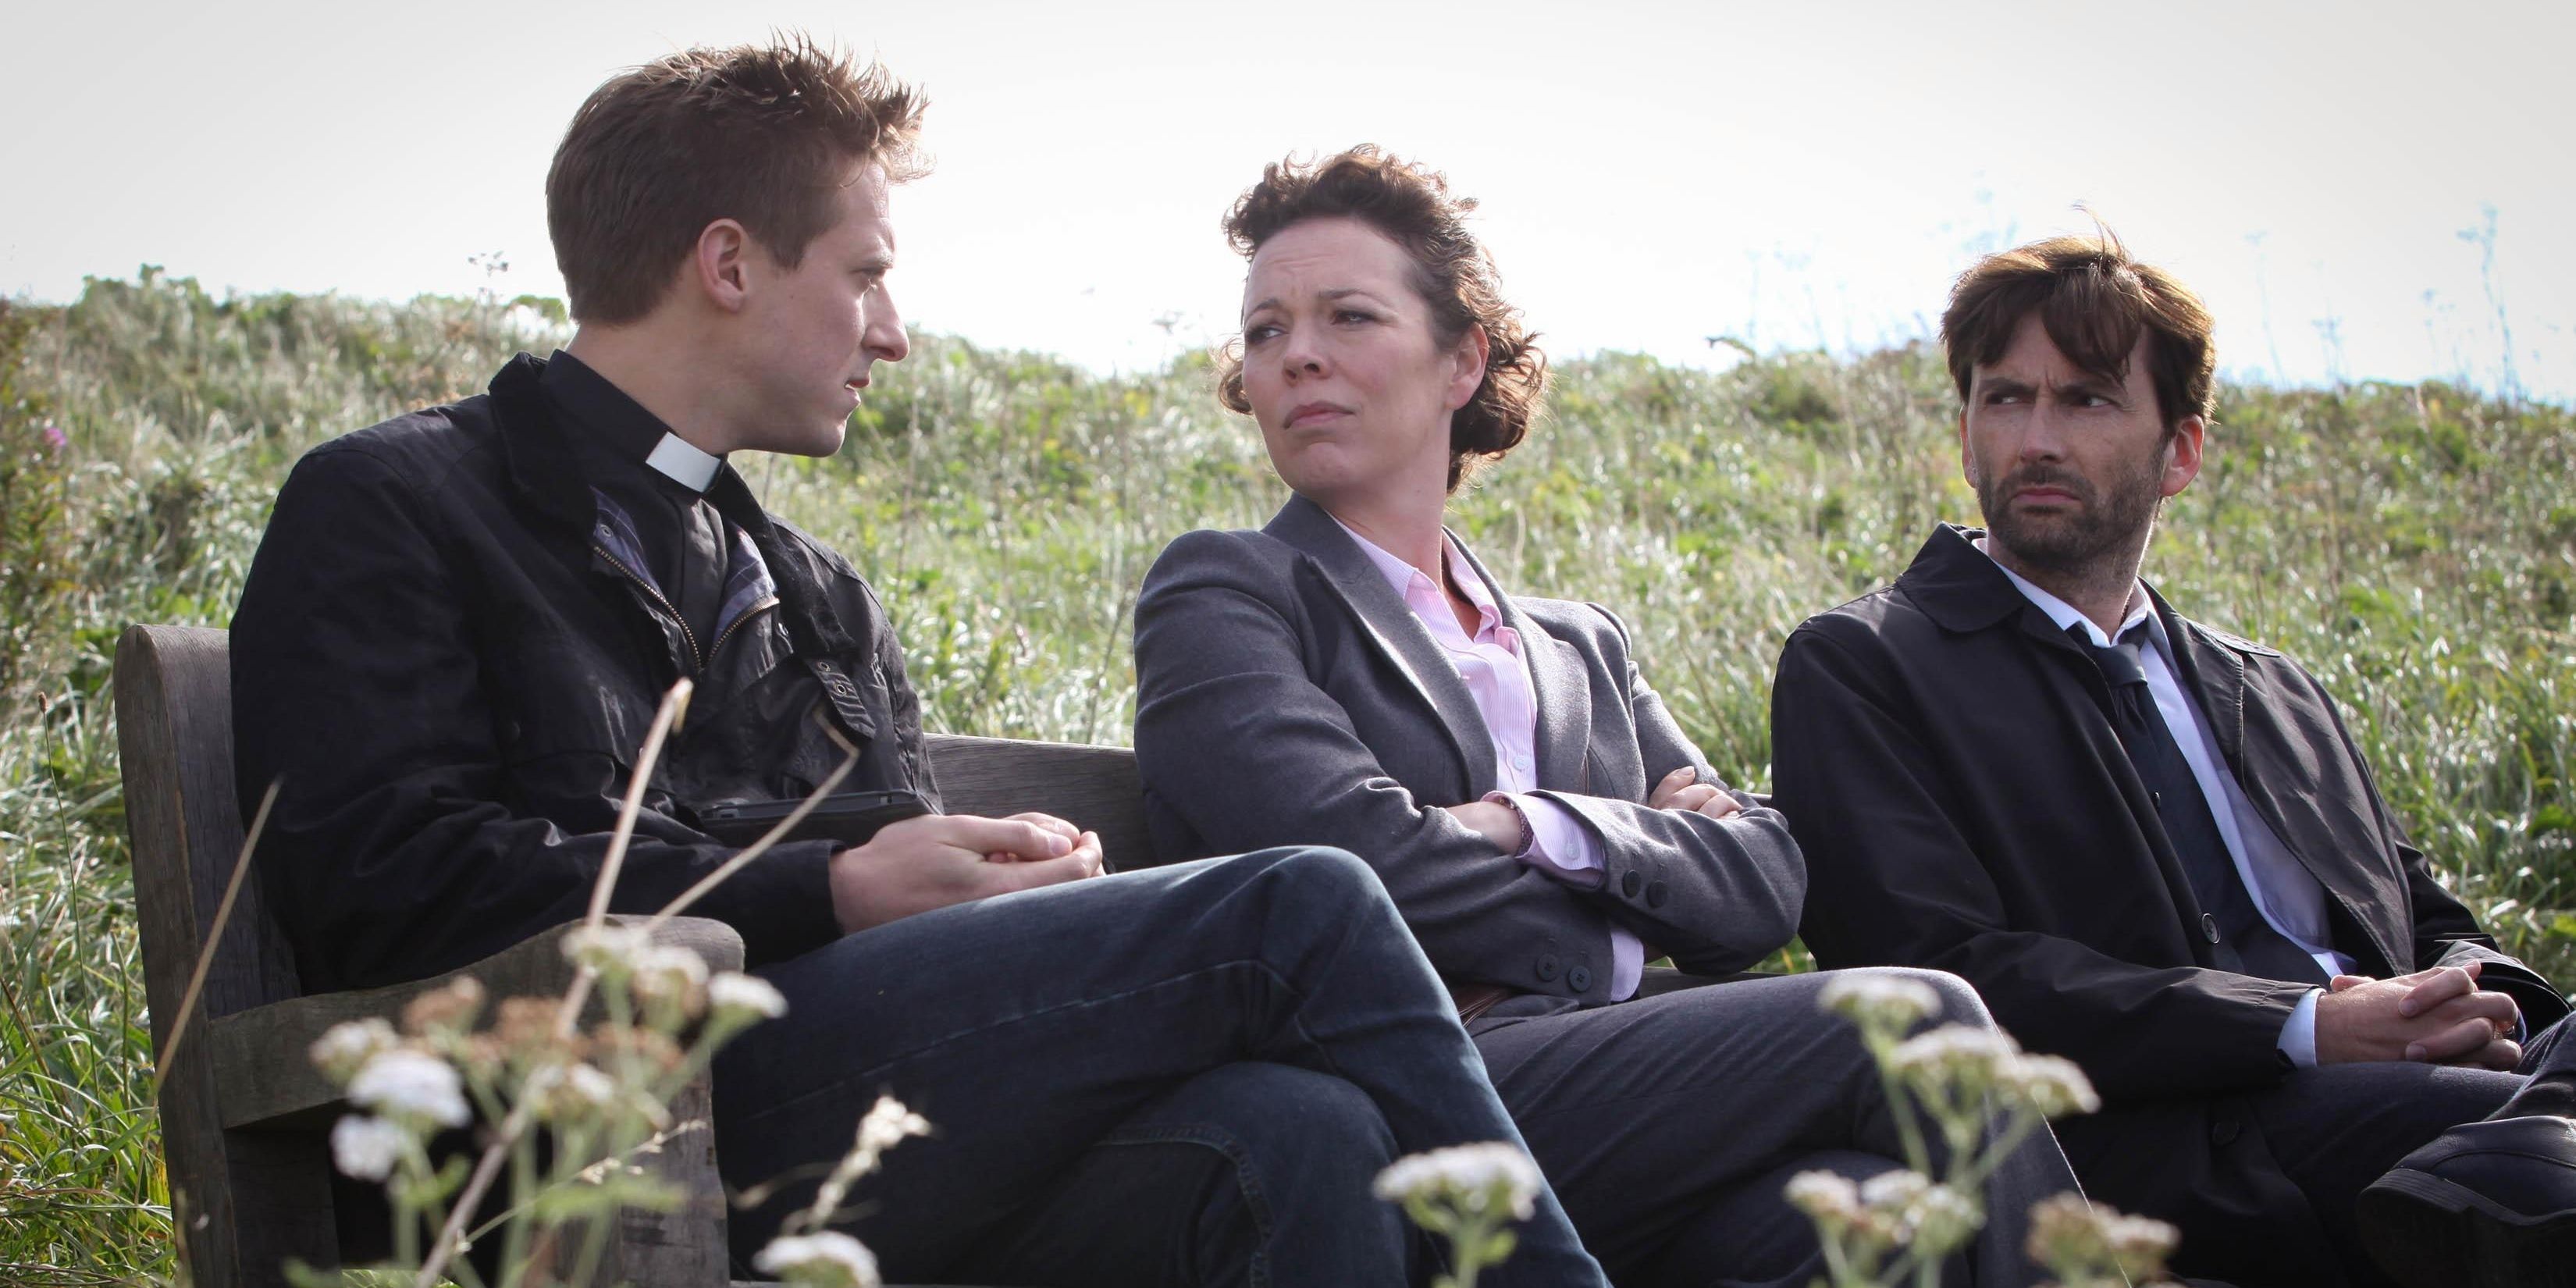 David Tenant and Olivia Colman speak with a priest outside in Broadchurch